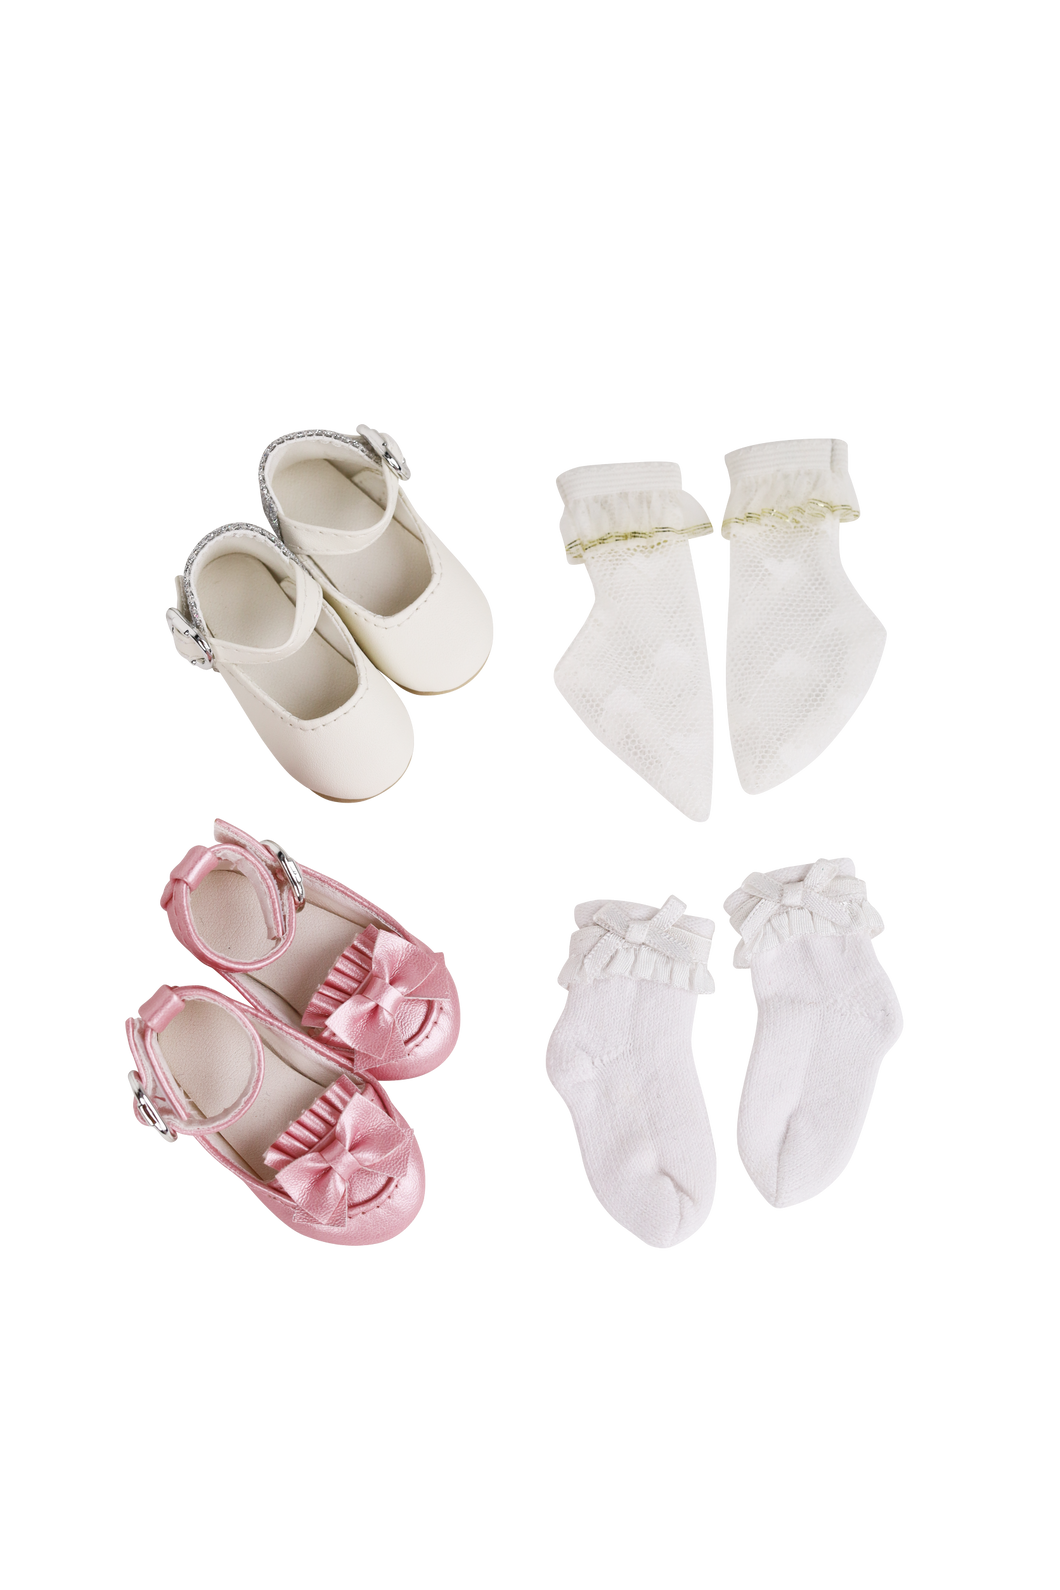 Goody Two-shoes (Shoe Set)